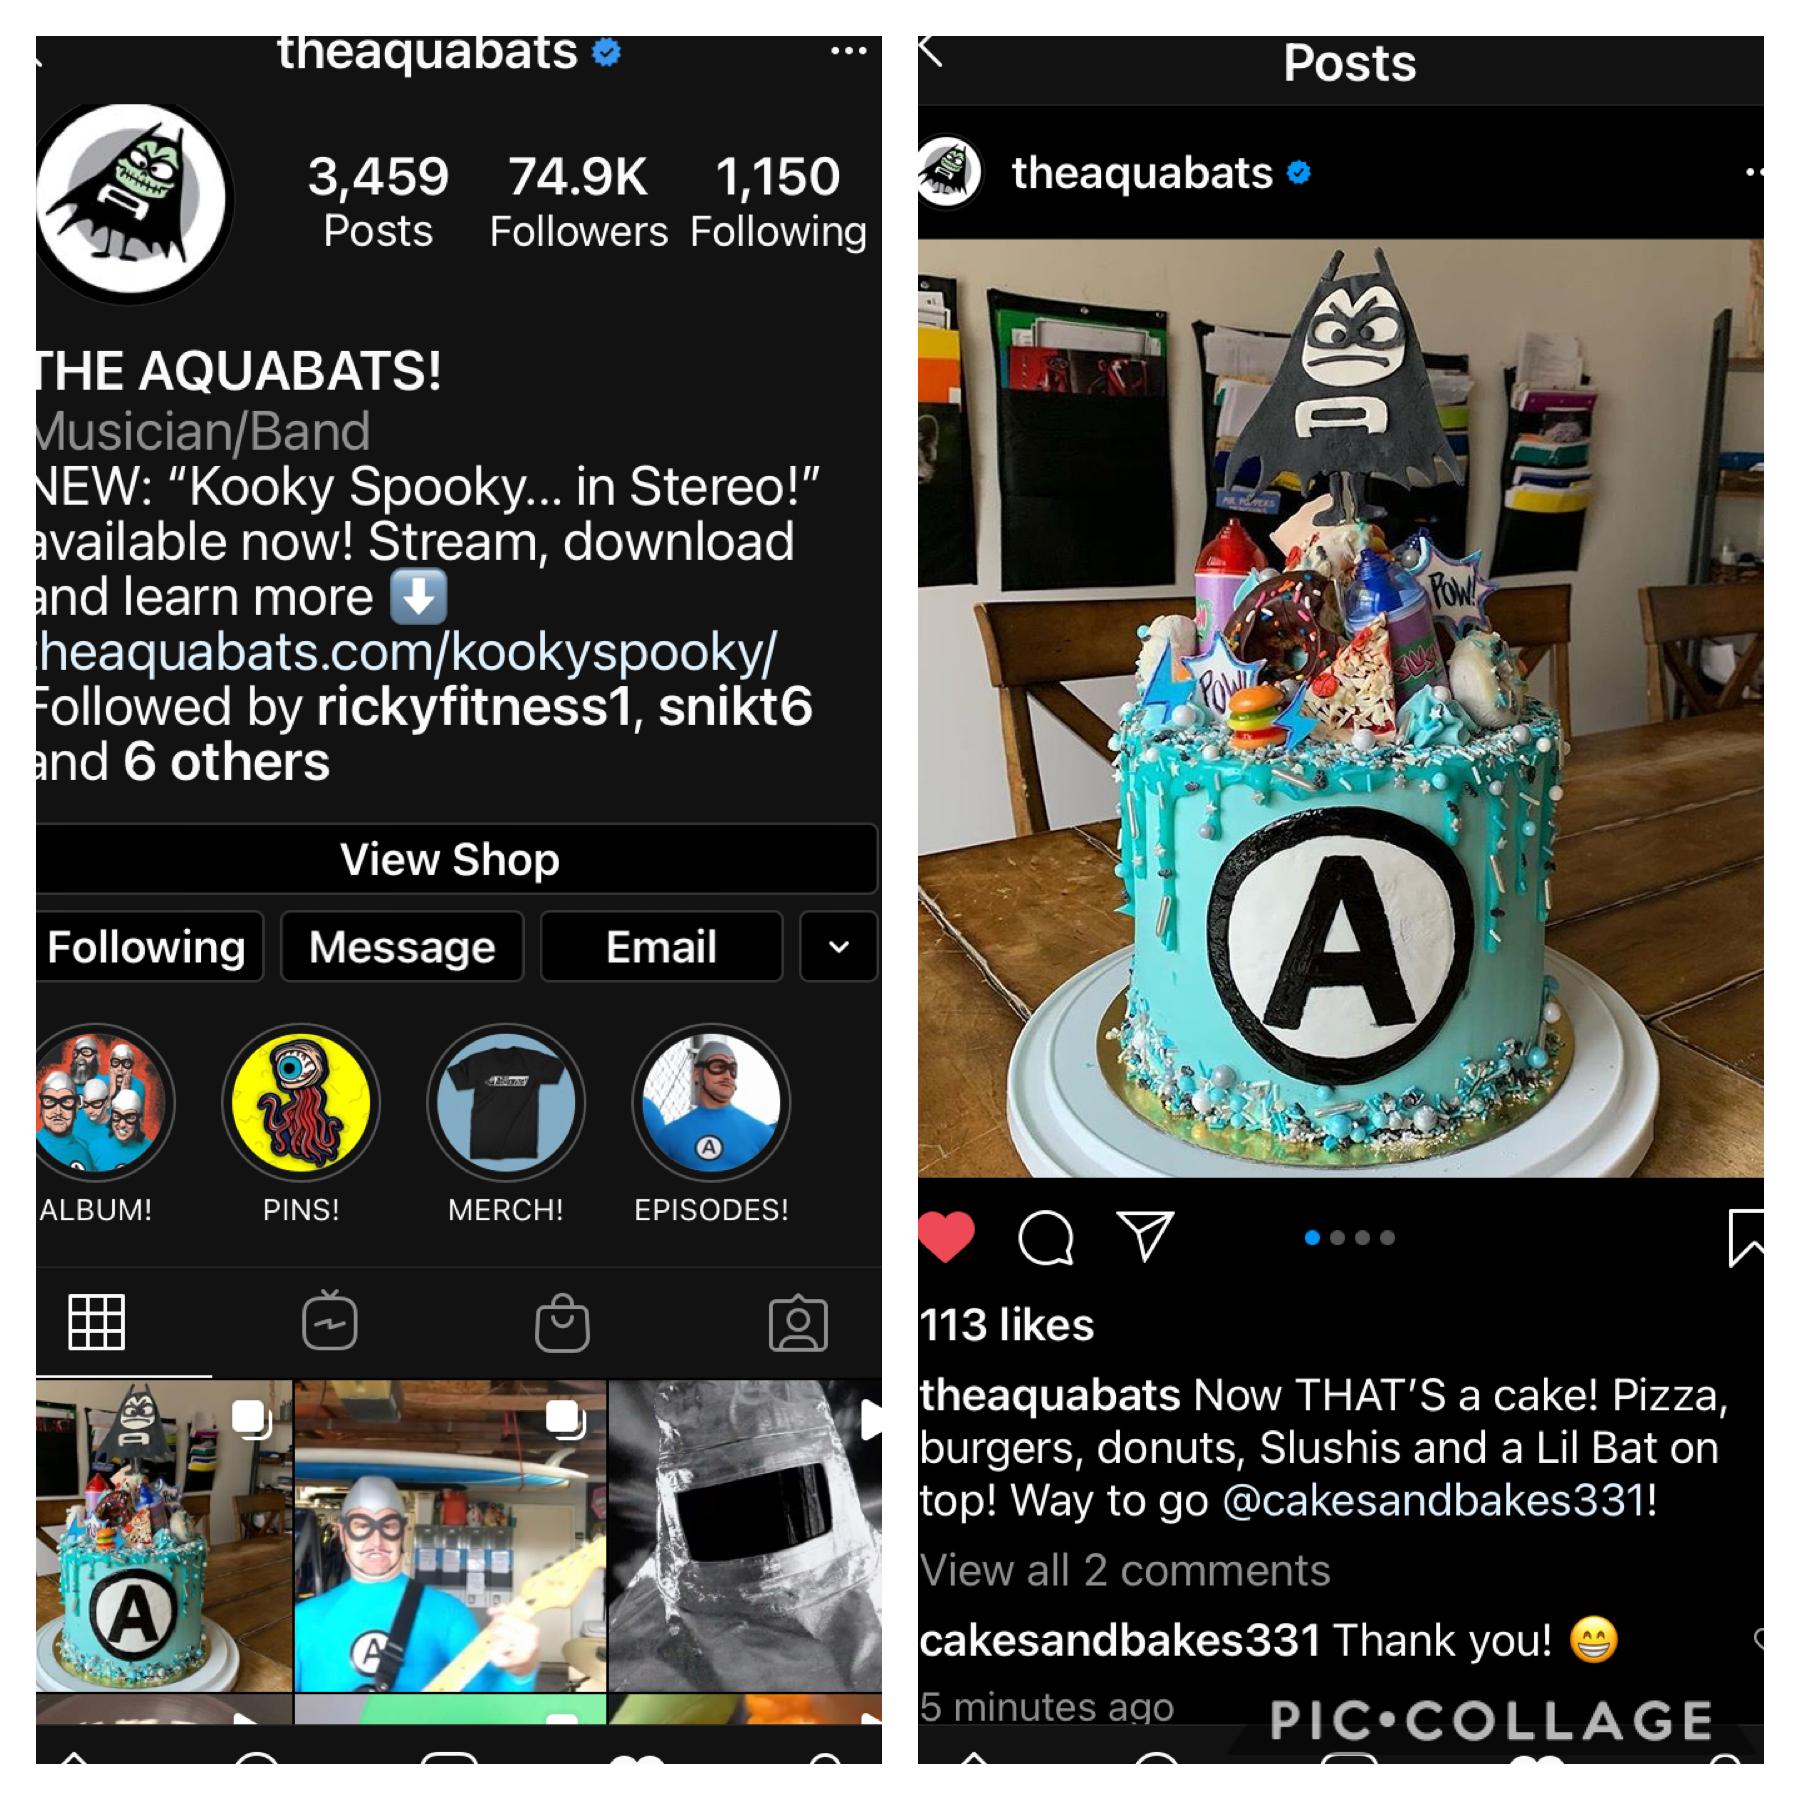 Guys!! The Aquabats featured MY cake on their Instagram page! I’m so excited 😁